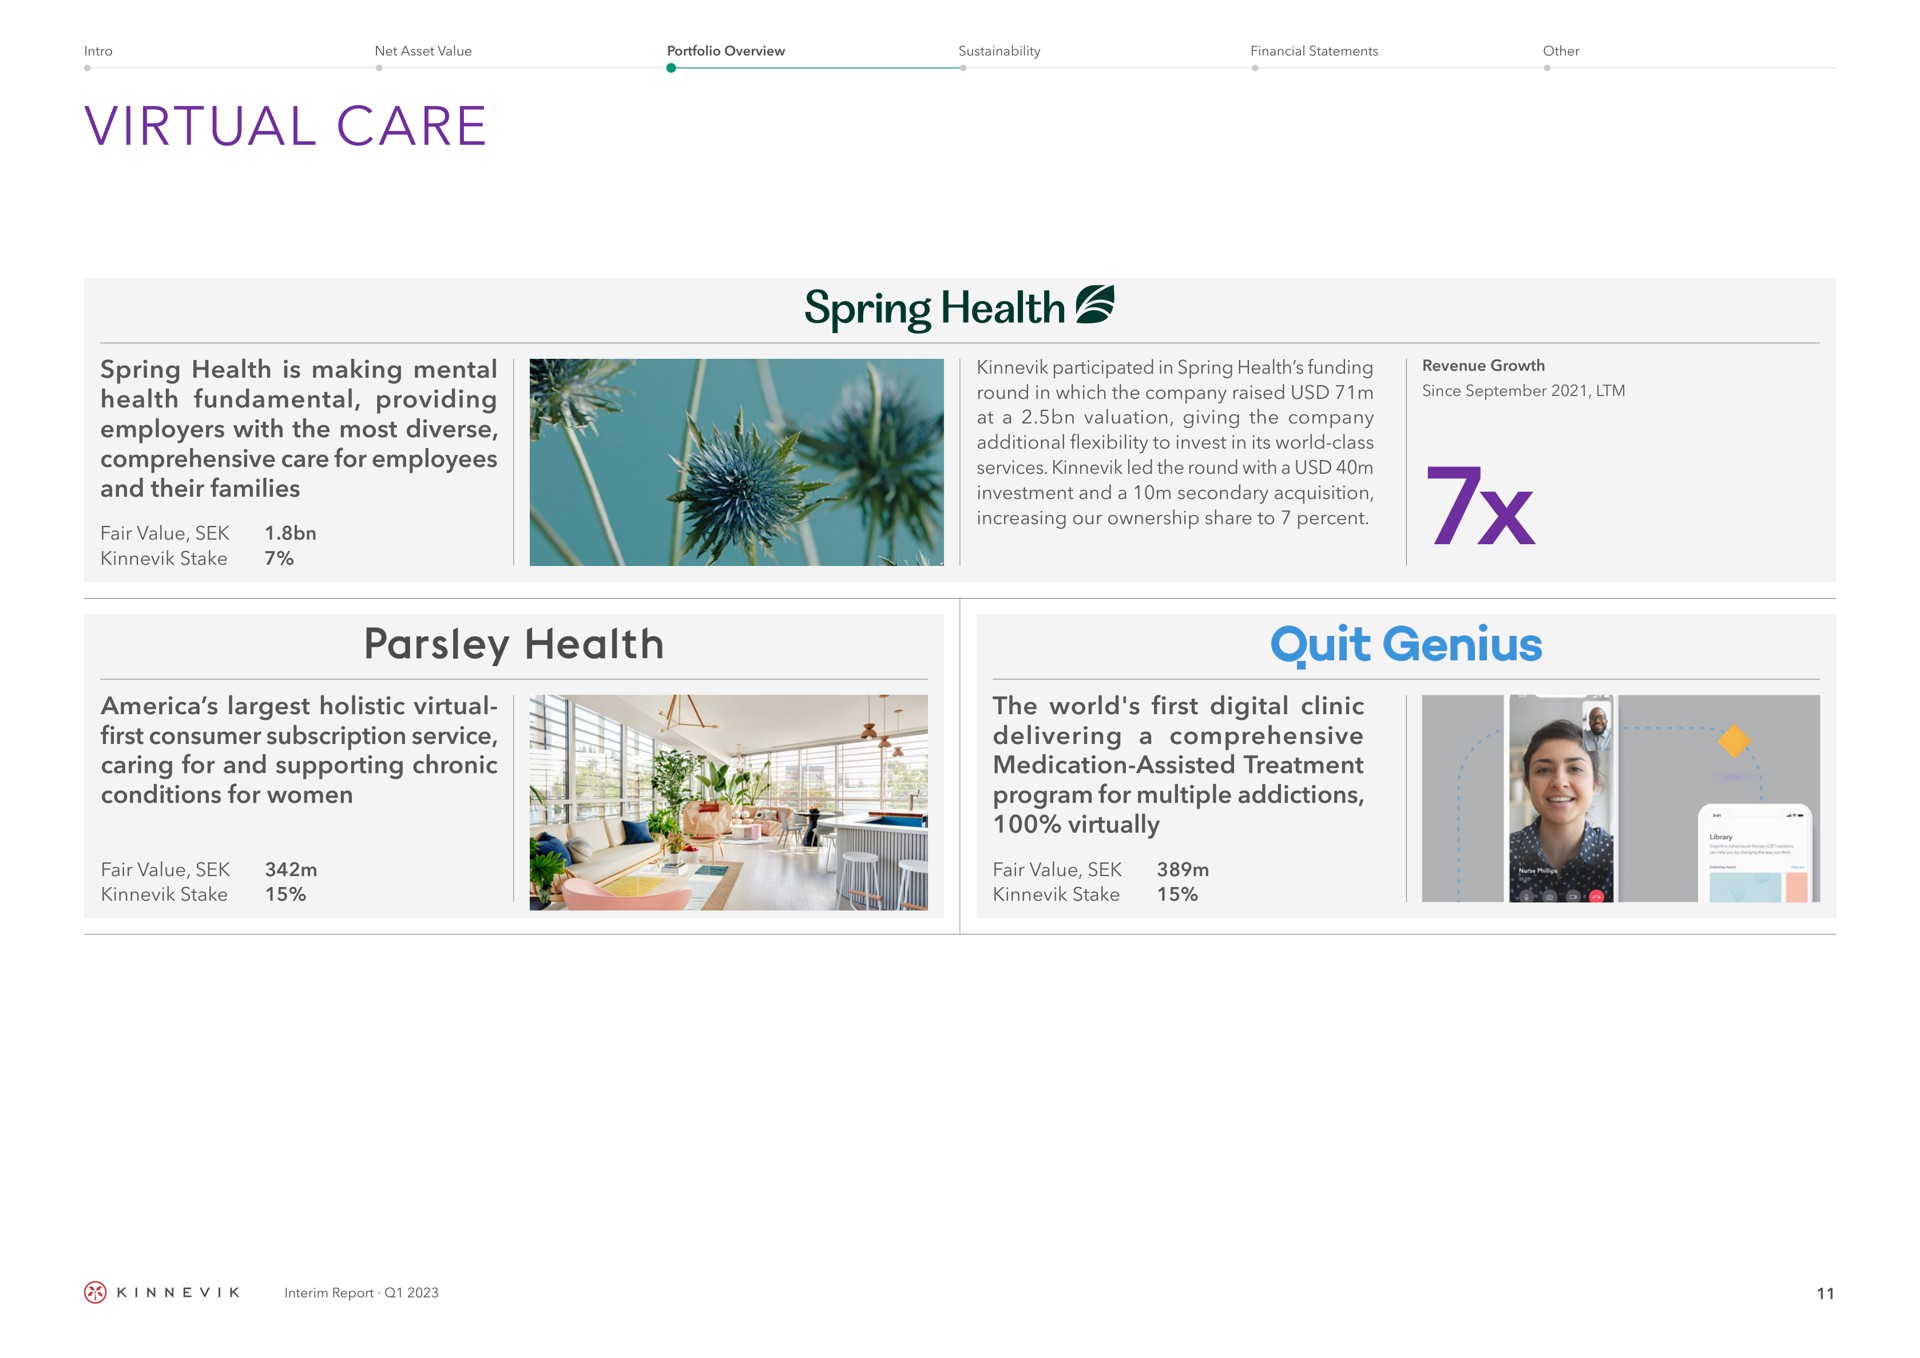 virtual care spring health is making mental health fundamental providing employers with the most diverse comprehensive care for employees and their families fair value stake holistic virtual first consumer subscription service caring for and supporting chronic conditions for women fair value stake participated in spring health funding round in which the company raised at a valuation giving the company additional flexibility to invest in its world class services led the round with a investment and a secondary acquisition increasing our ownership share to percent the world first digital clinic delivering a comprehensive medication assisted treatment program for multiple addictions virtually fair value stake parsley quit genius interim report | Kinnevik